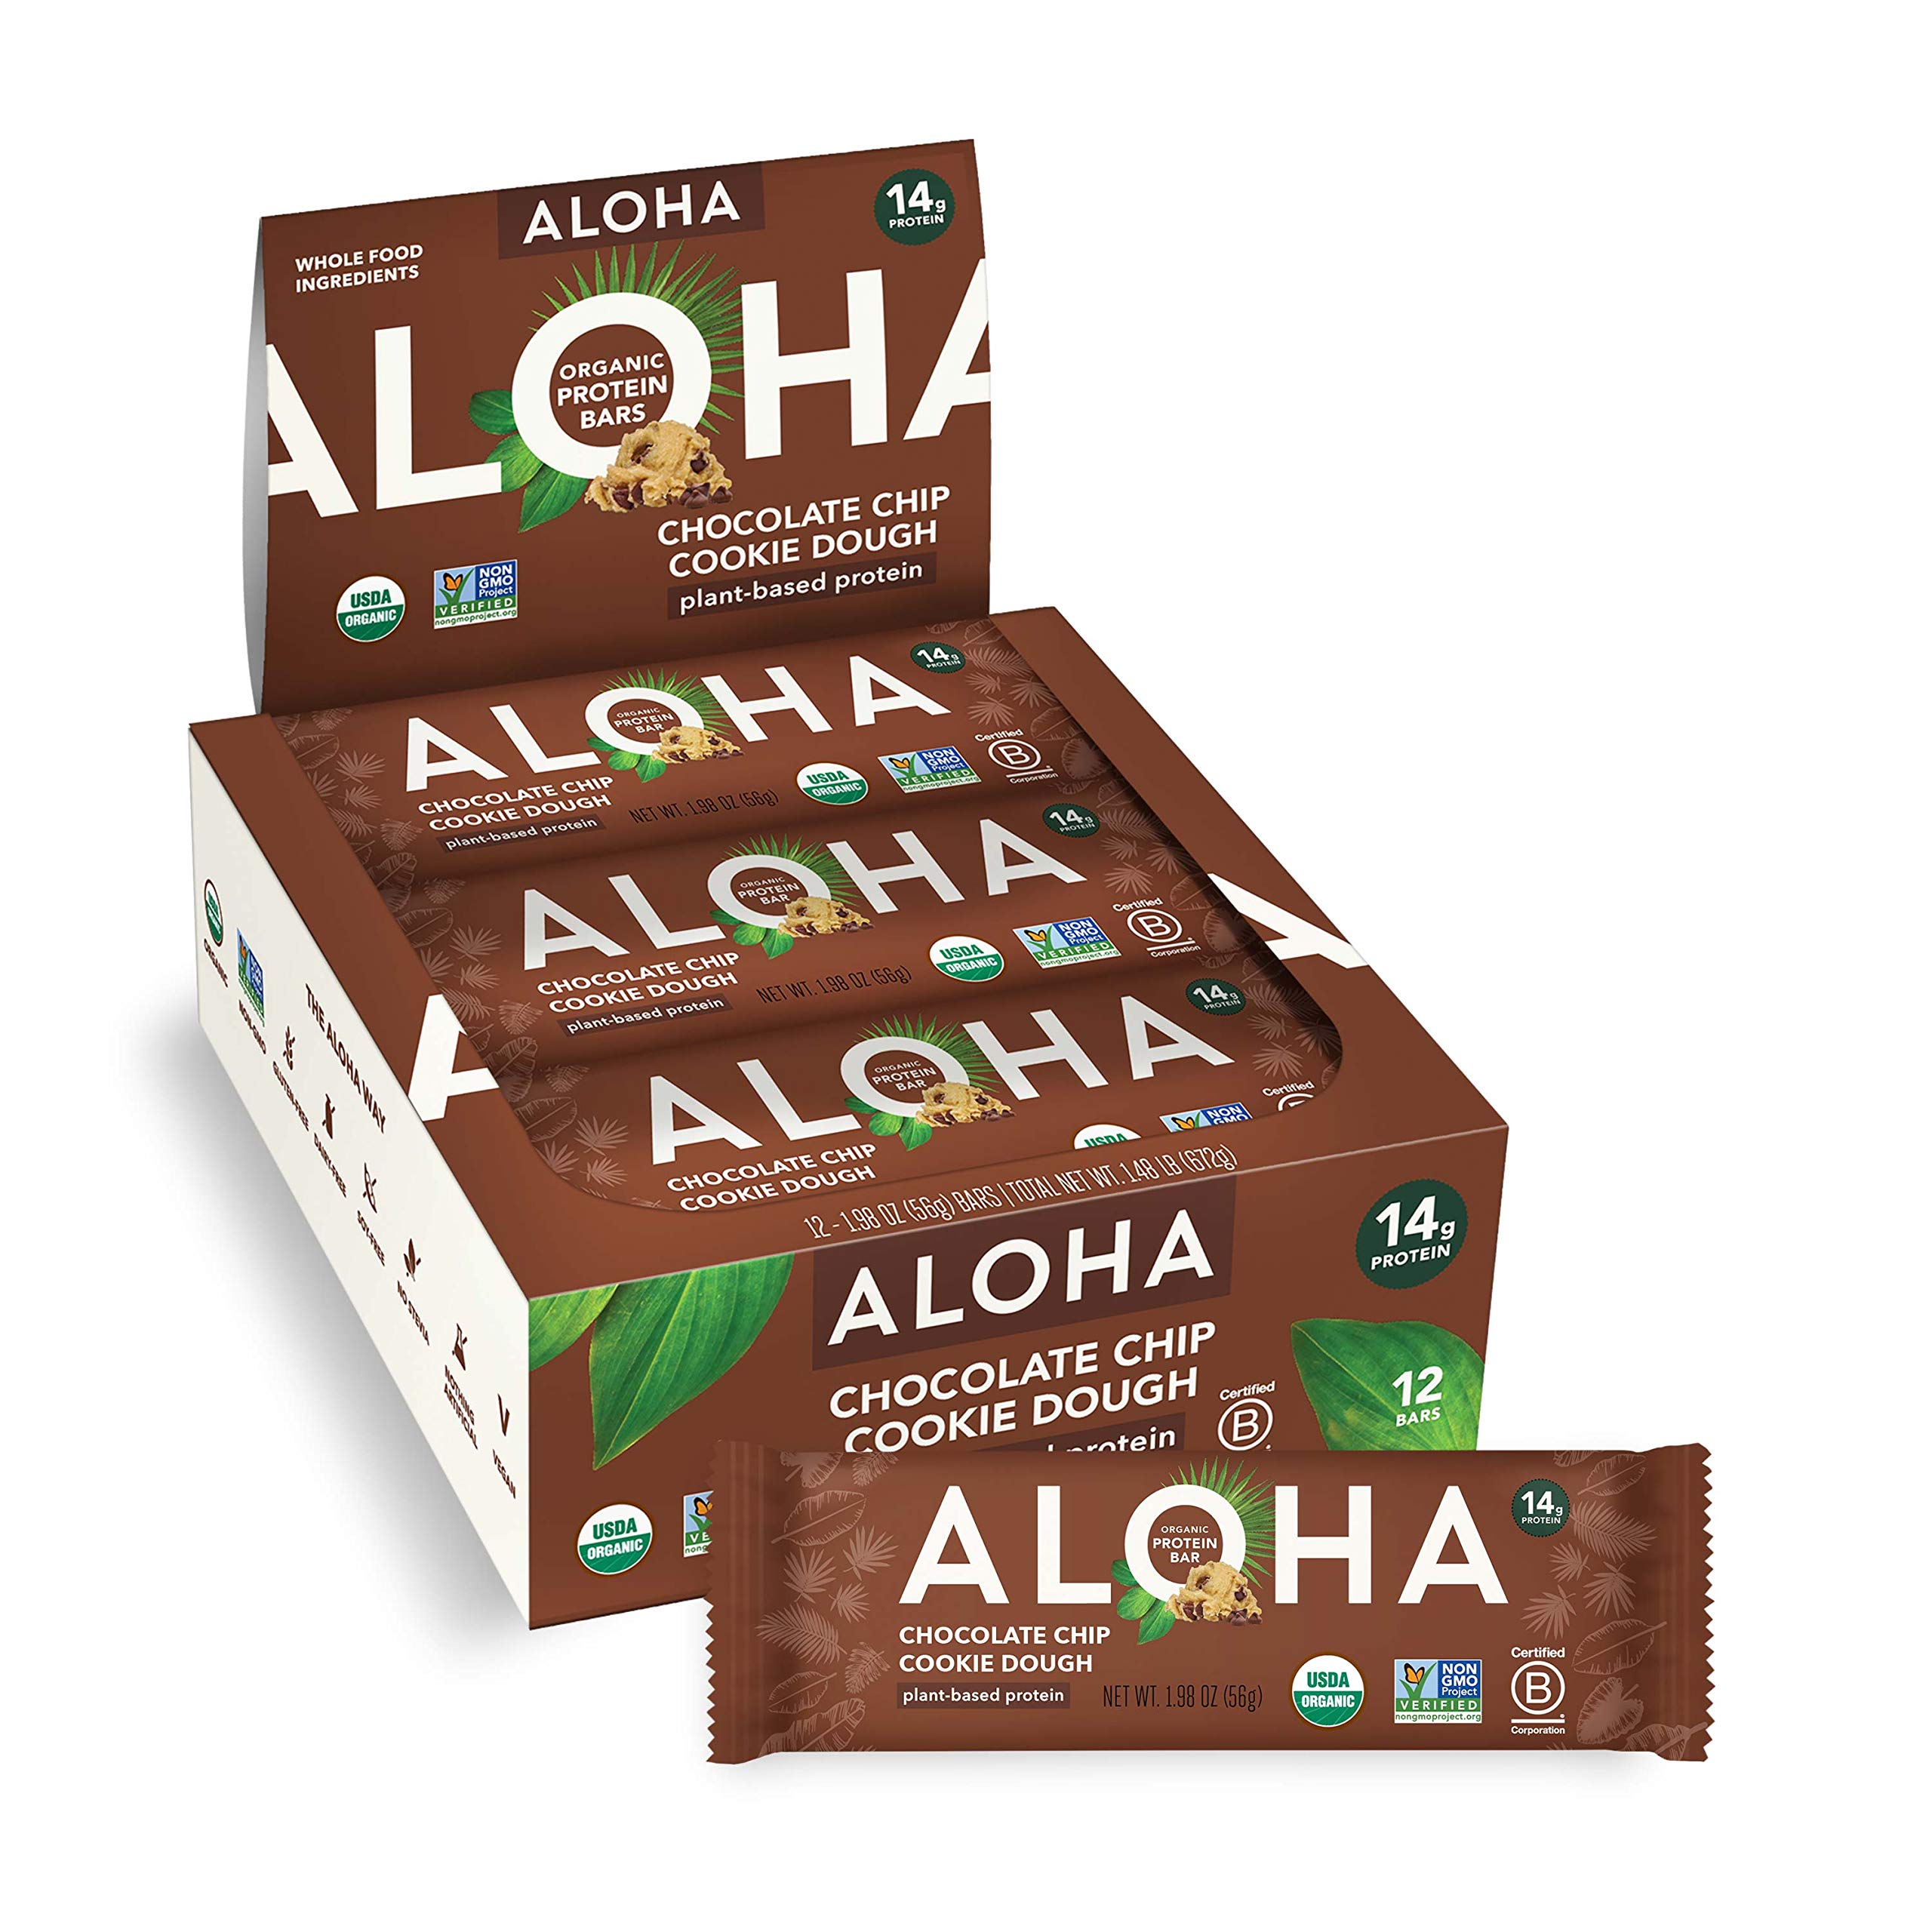 ALOHA Organic Plant Based Protein 1.9oz Bars Chocolate Chip Cookie Dough 12 Count Vegan Snacks Low Sugar Gluten-Free,Low Carb,Paleo,Non-GMO,Stevia-Free~$17.09 With S&S @ Amazon